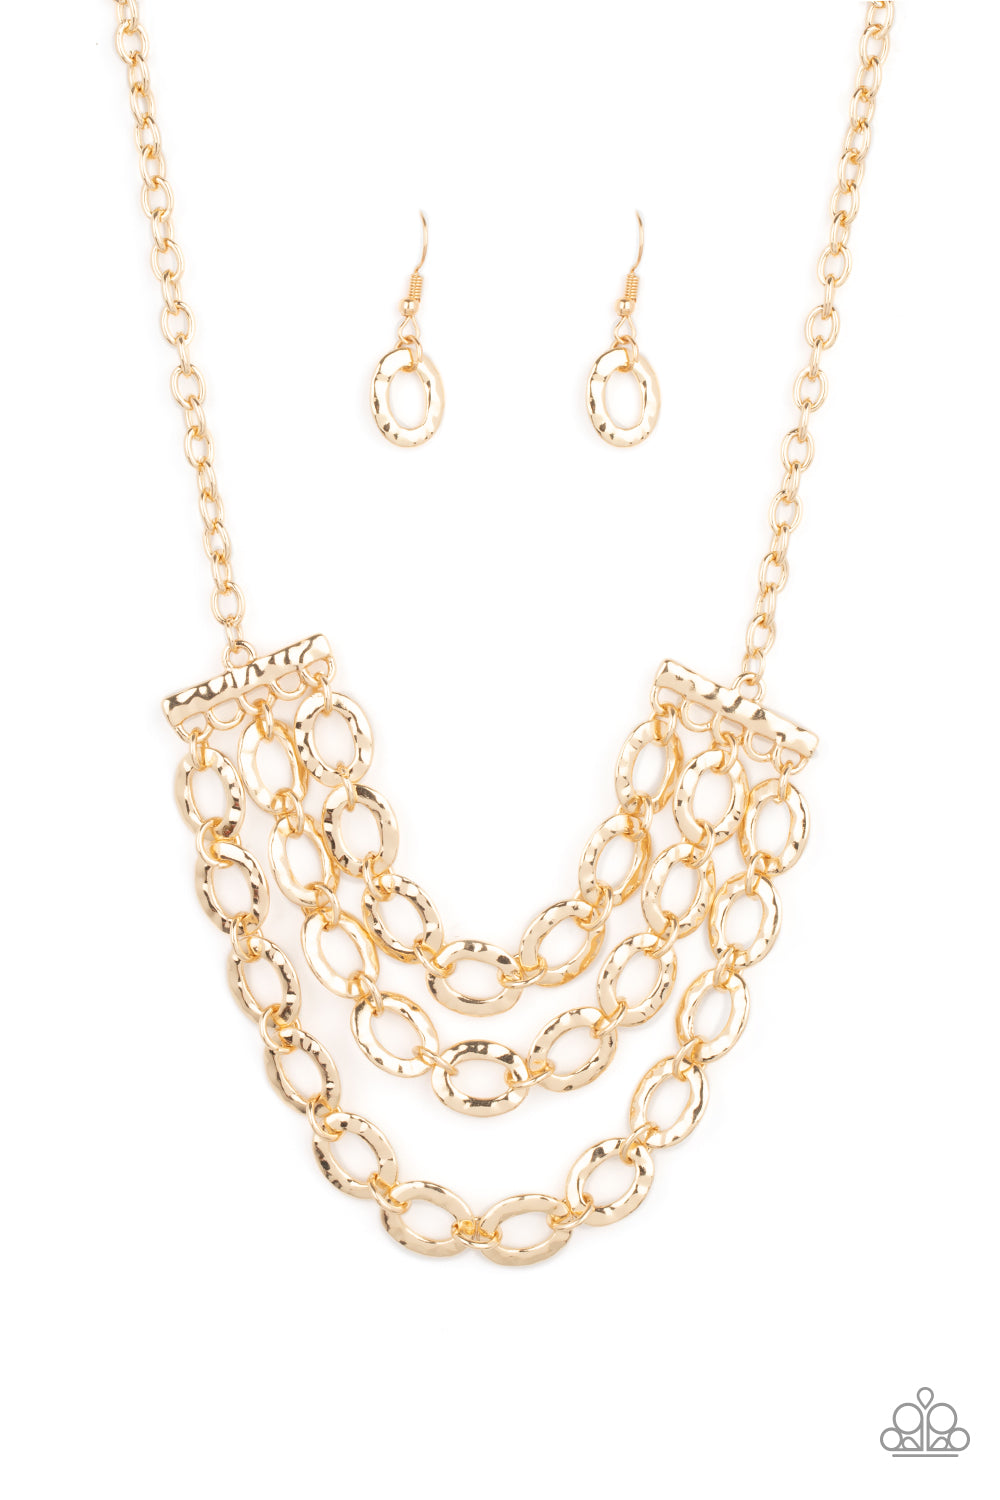 Repeat After Me - Gold ***COMING SOON*** - Bling With Crystal